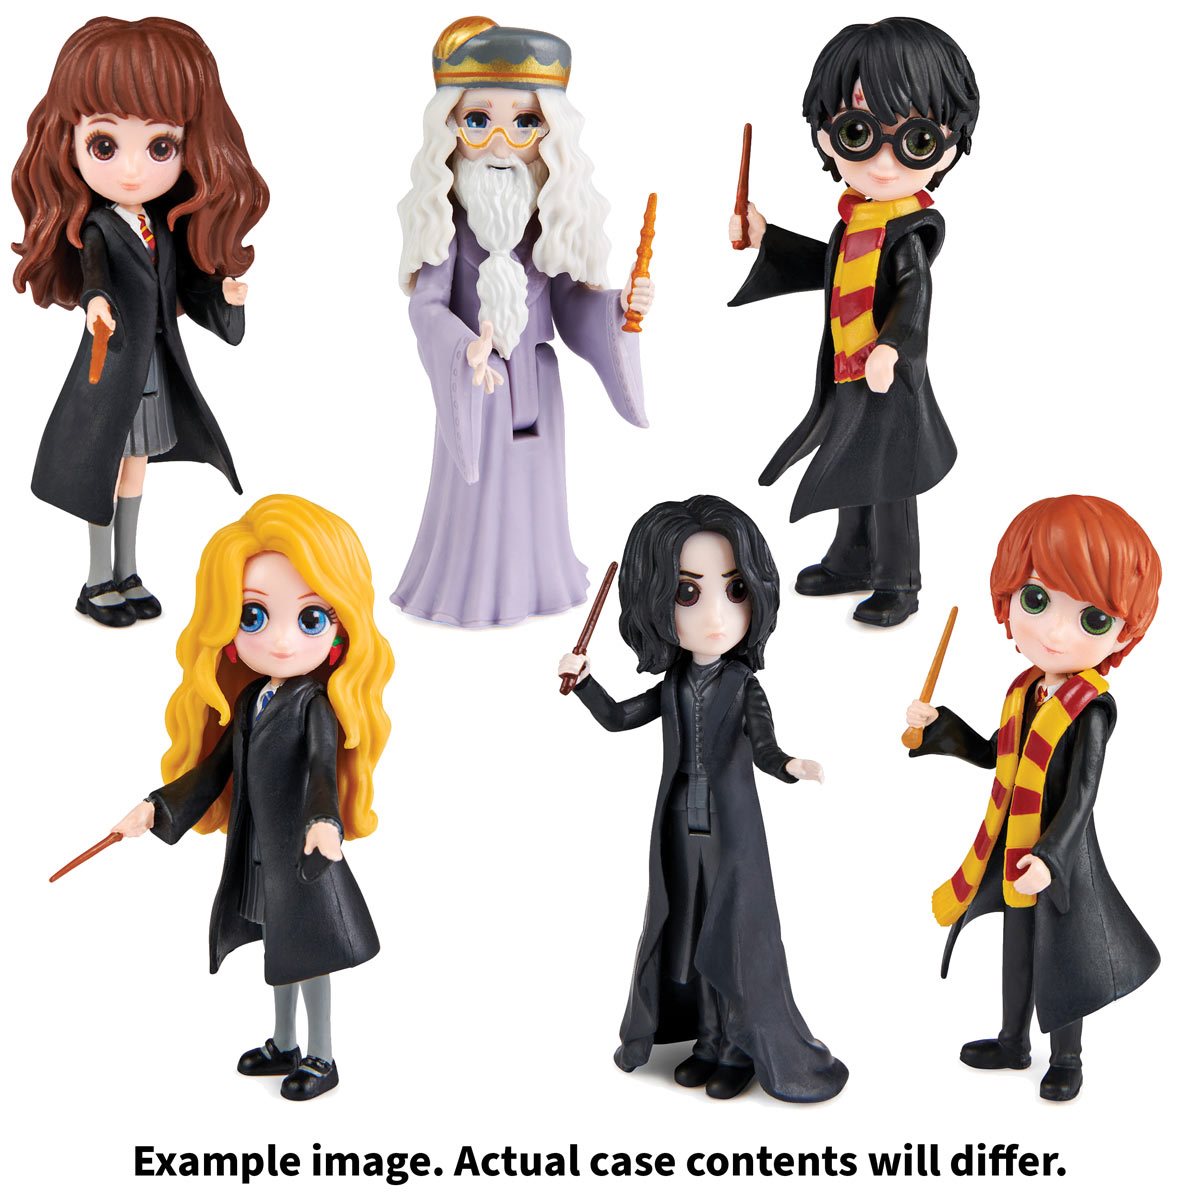 Harry Potter Wizarding World Magical Minis 3-Inch Collectible Figure You  Choose